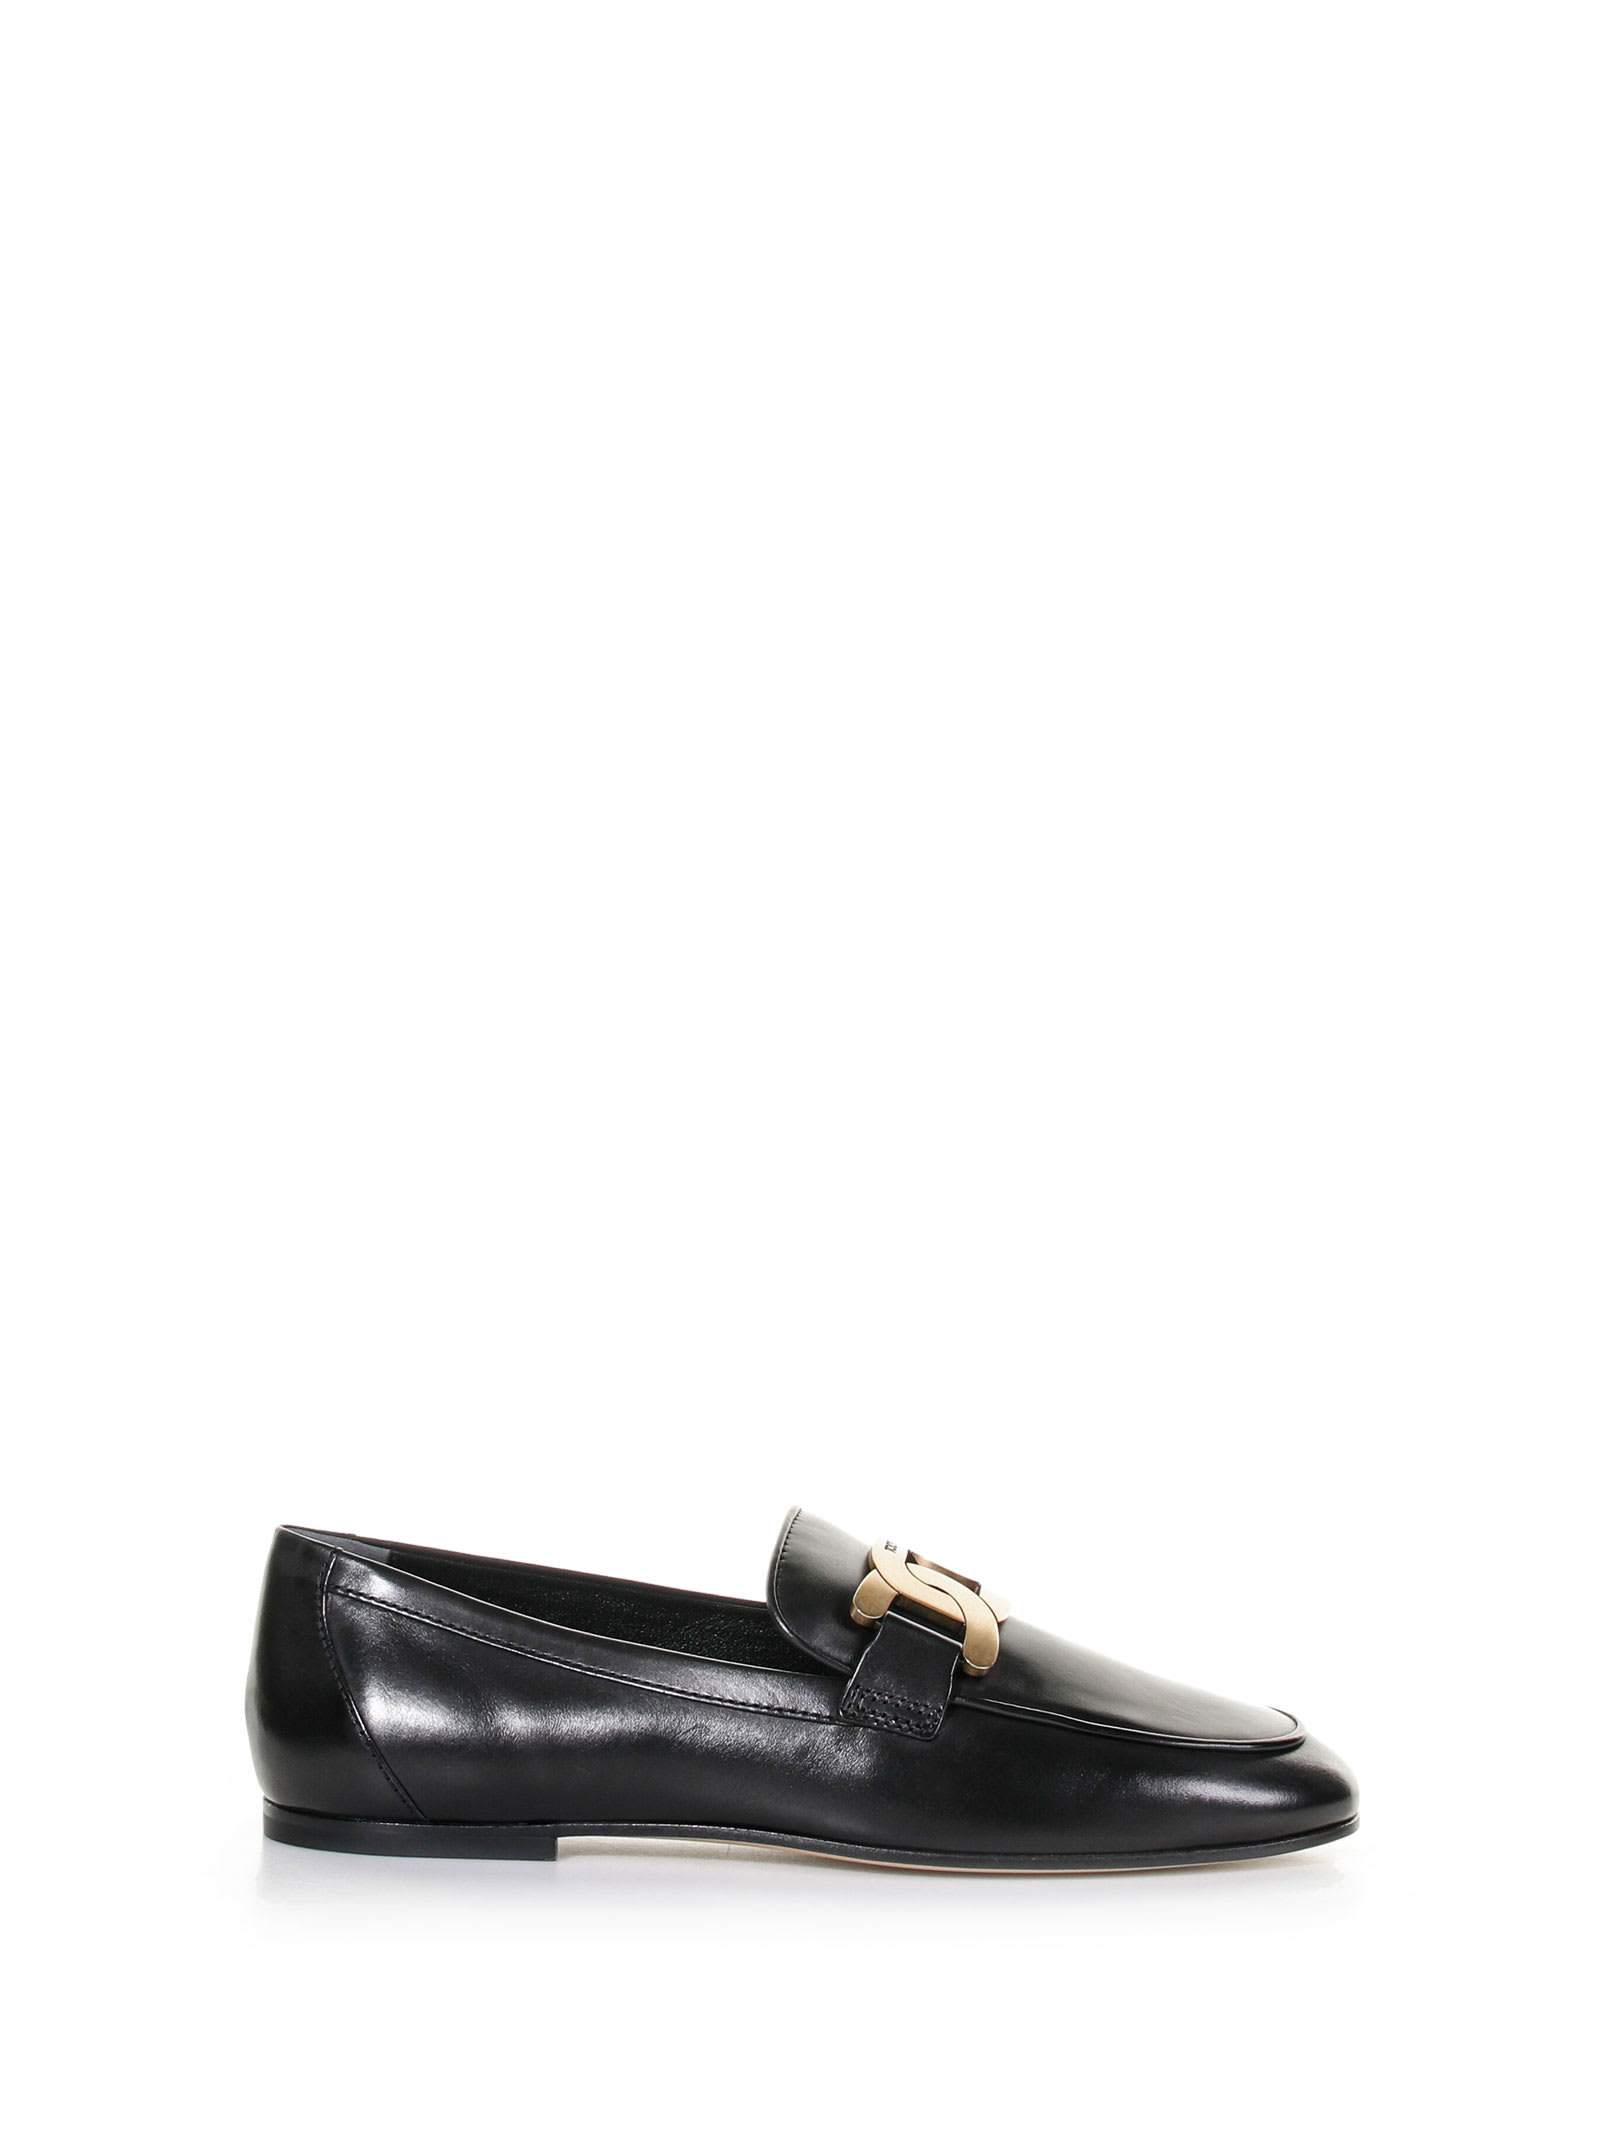 TOD'S KATE LOAFER IN LEATHER